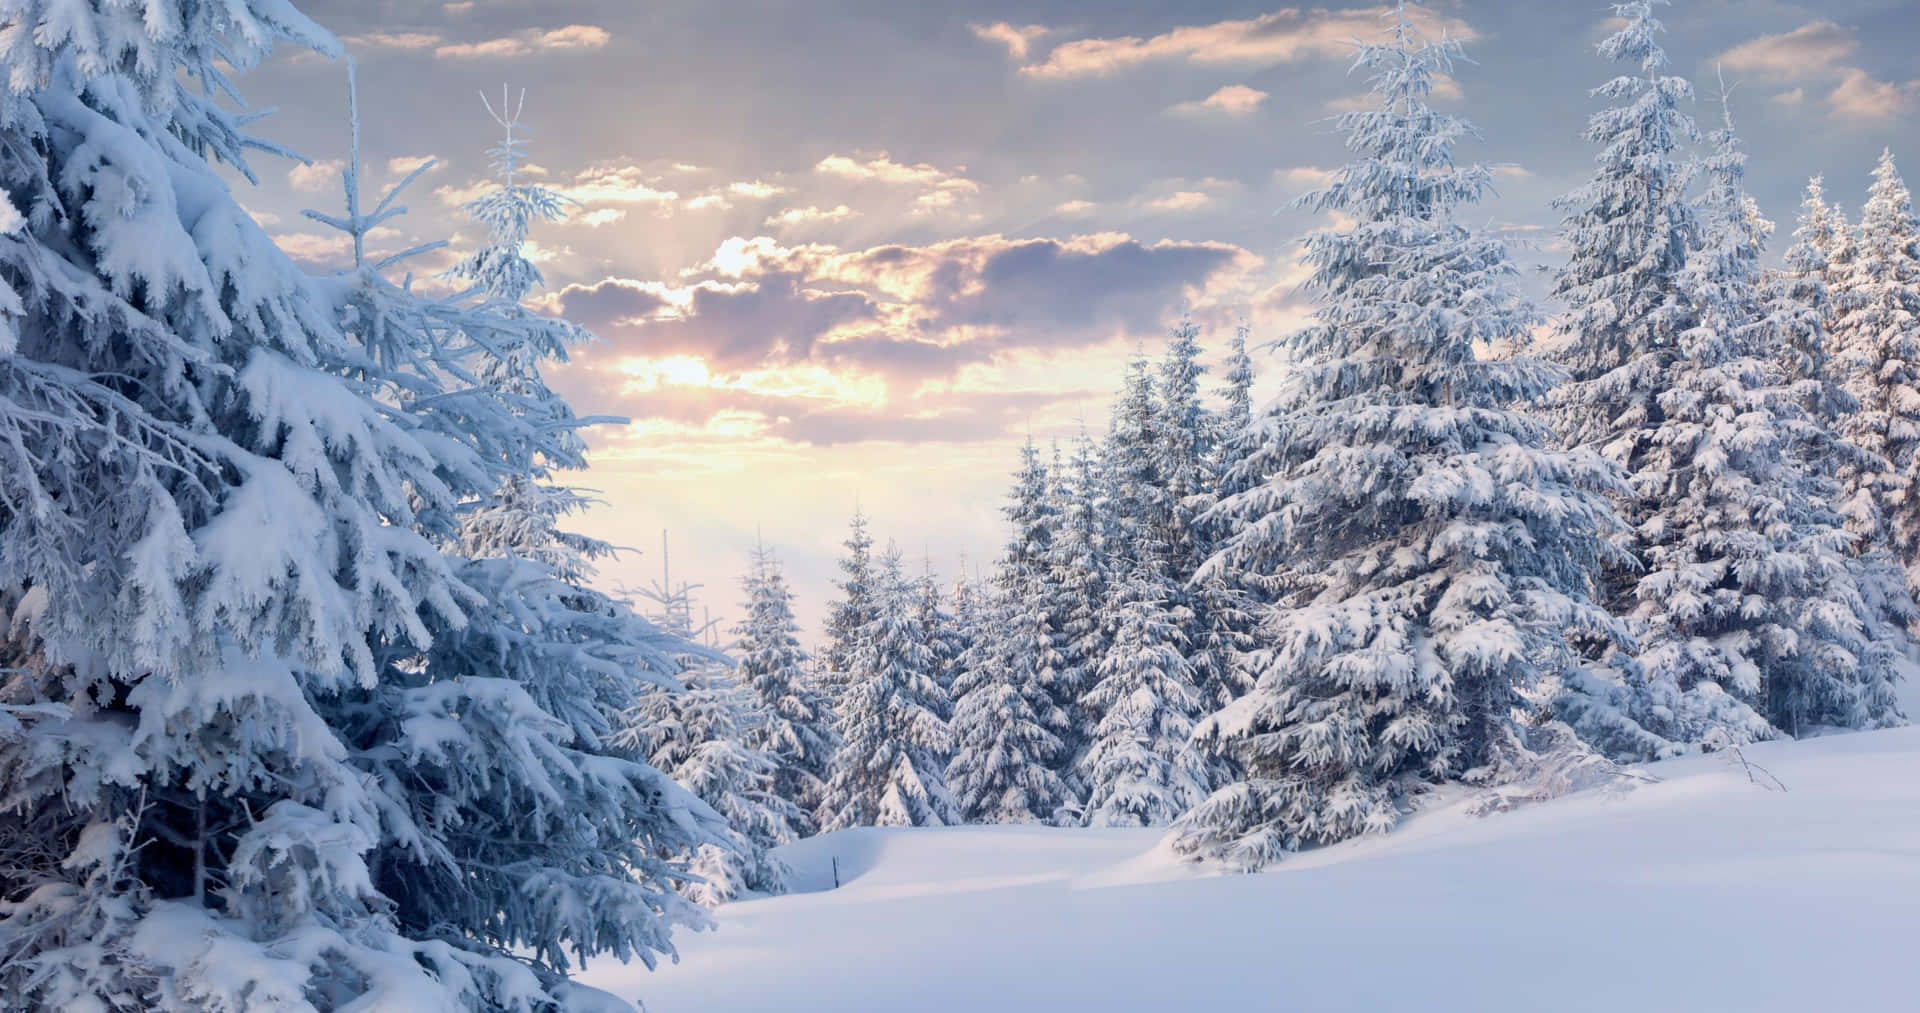 Get lost in the beauty of this snowy forest.